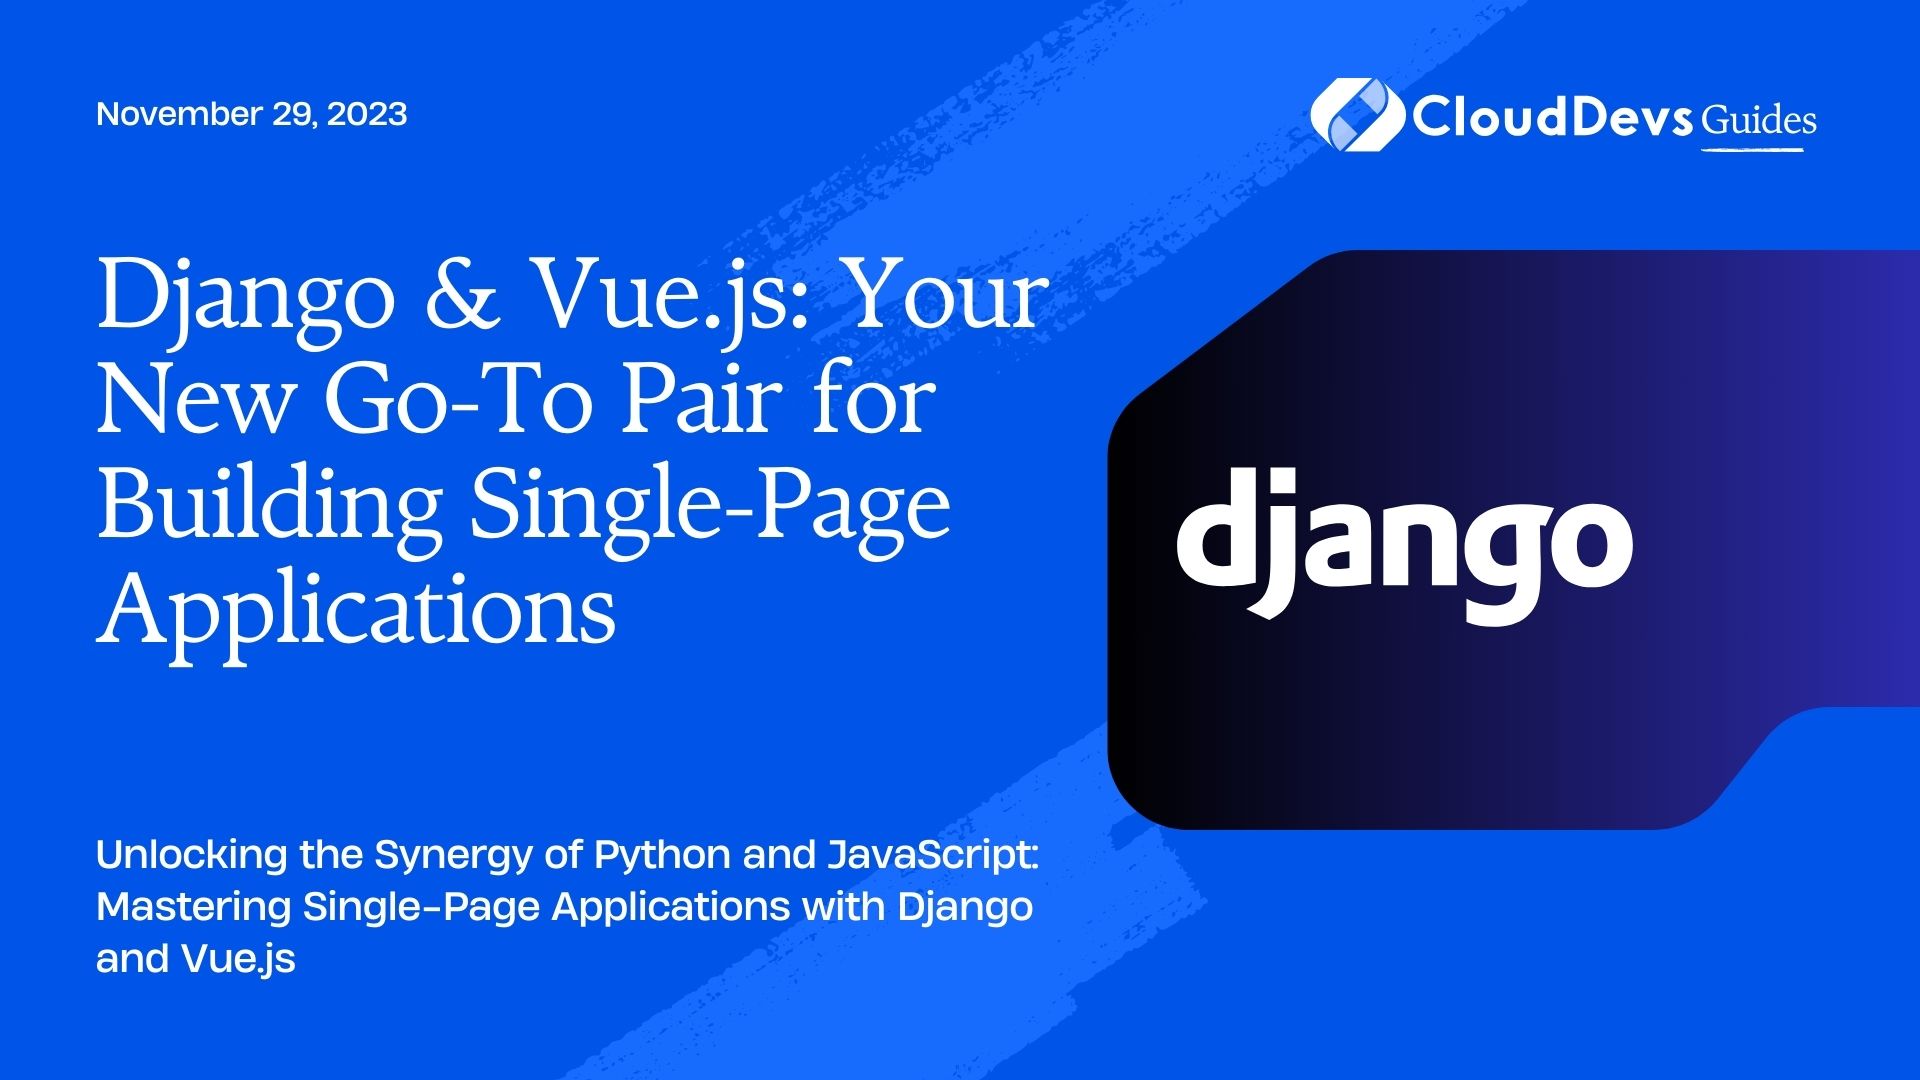 Django & Vue.js: Your New Go-To Pair for Building Single-Page Applications